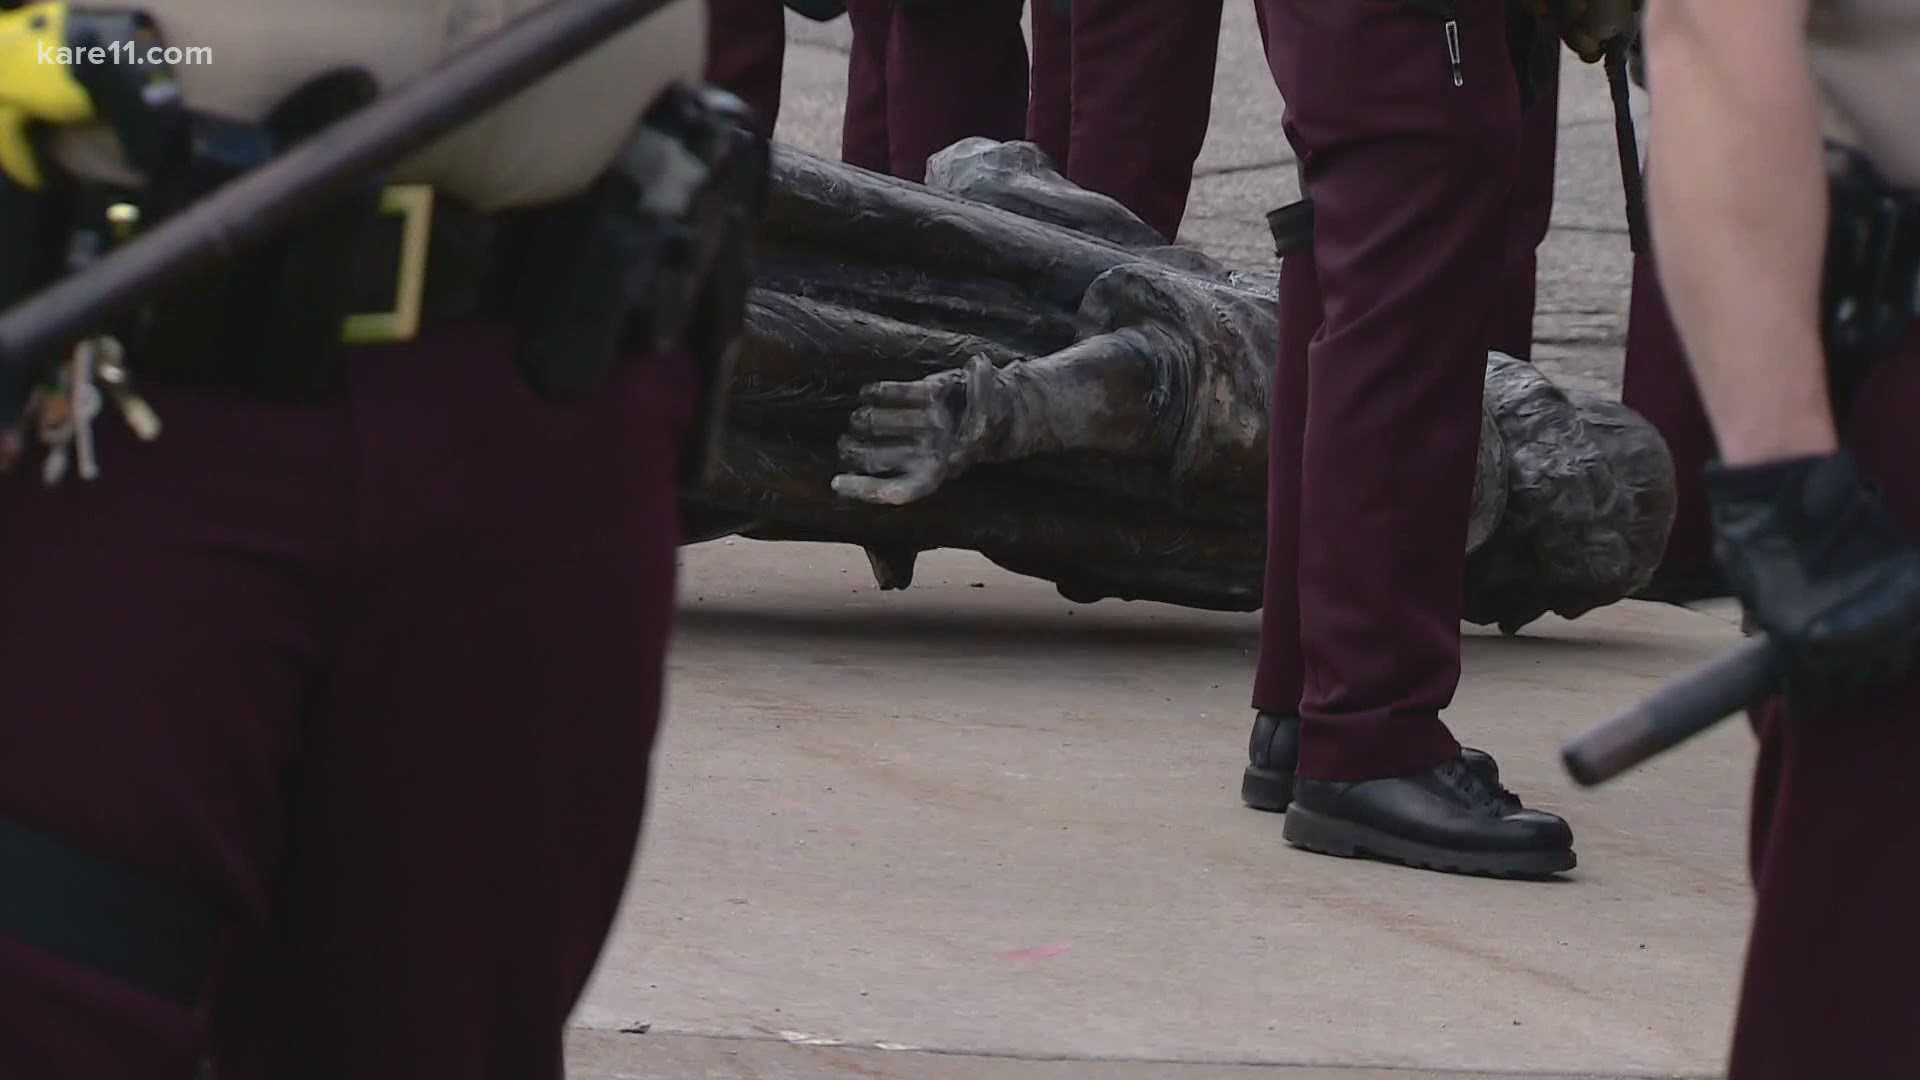 According to officials, there's a process in place for the public to object to items inside the Capitol, but they still need to create a policy items outside.